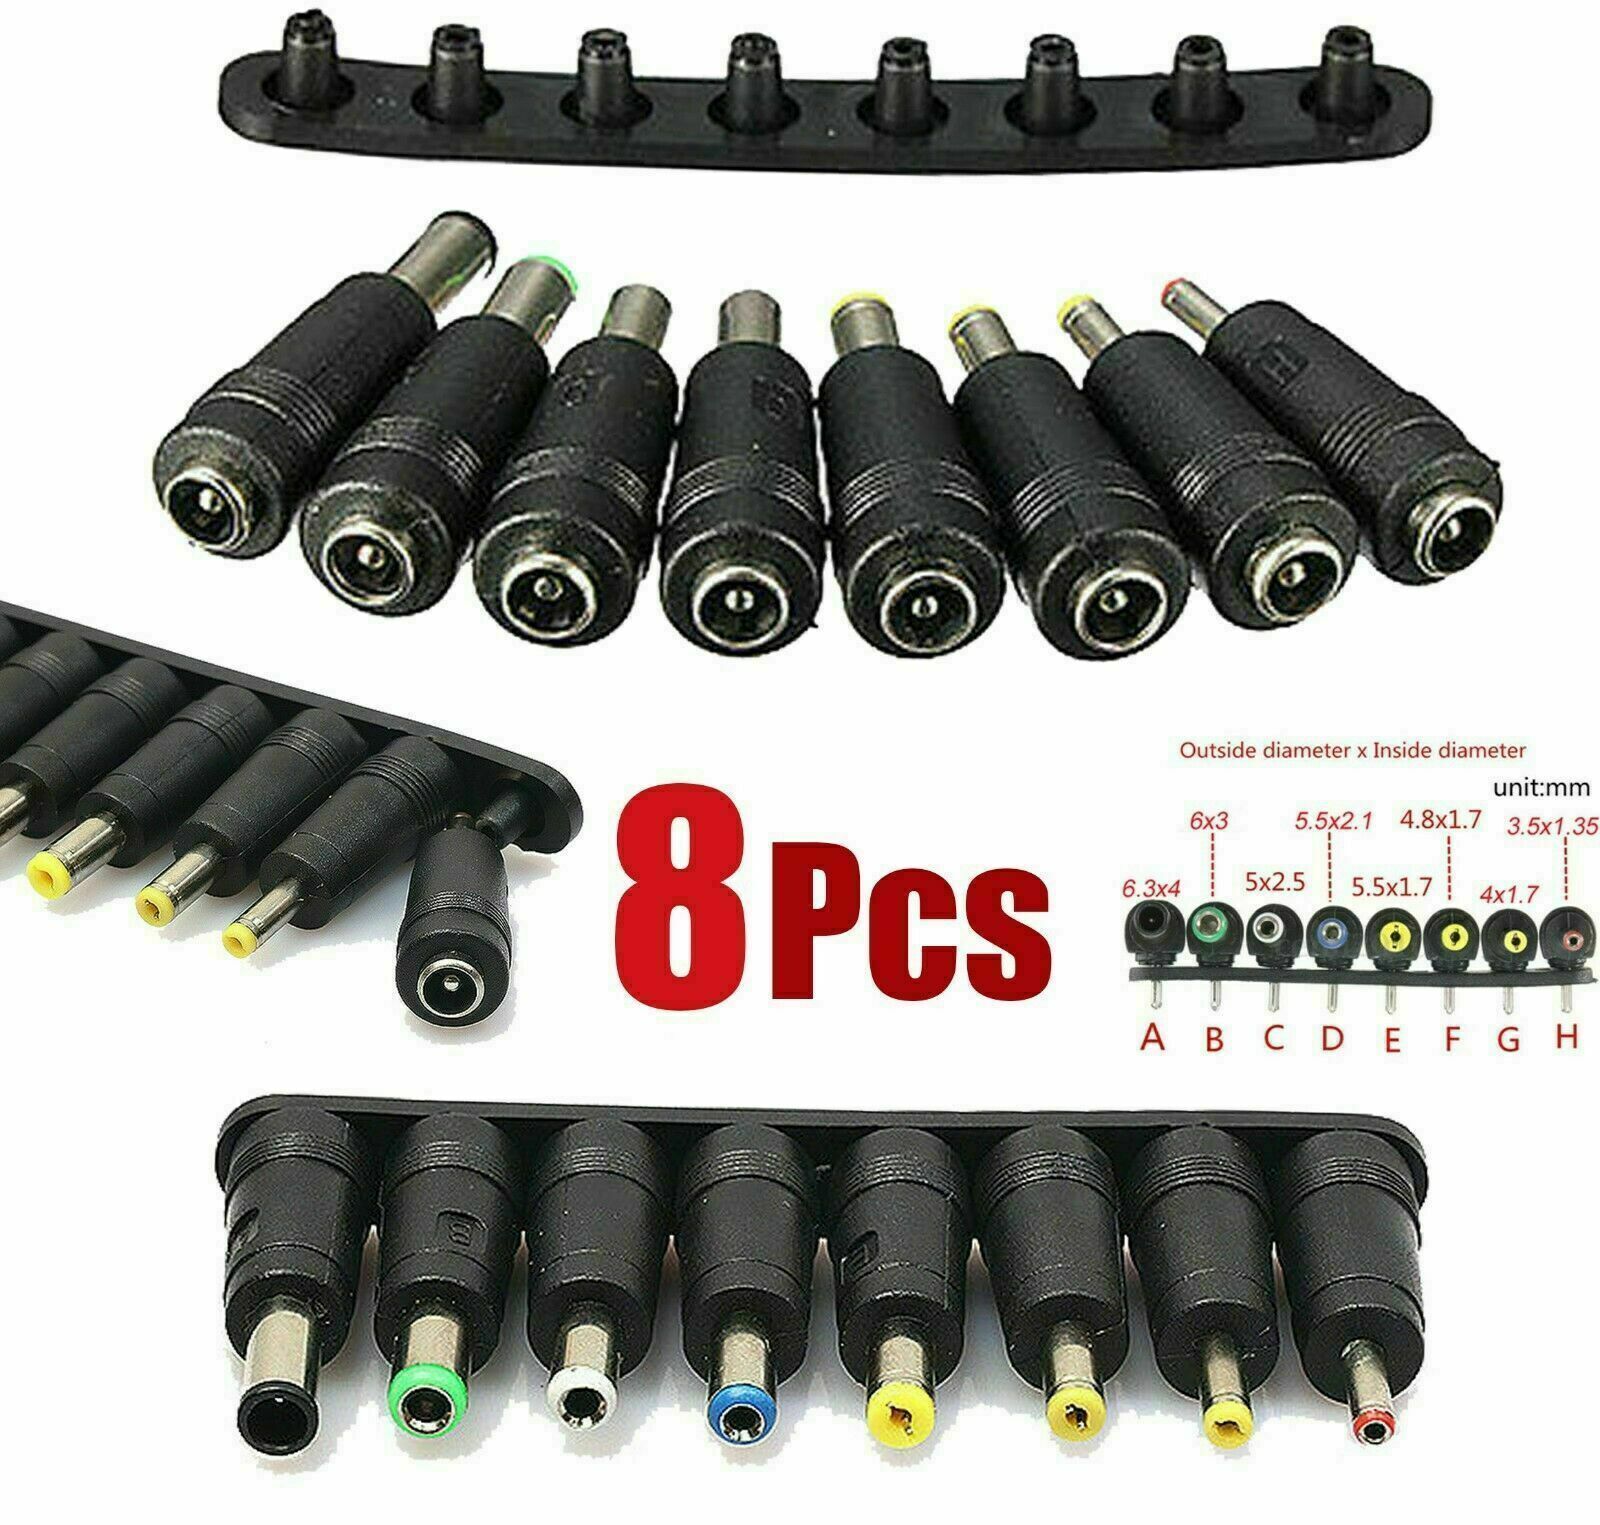 8in1 Universal DC AC Power Charger Adapter Kit for Laptop PC Notebook Tool Set